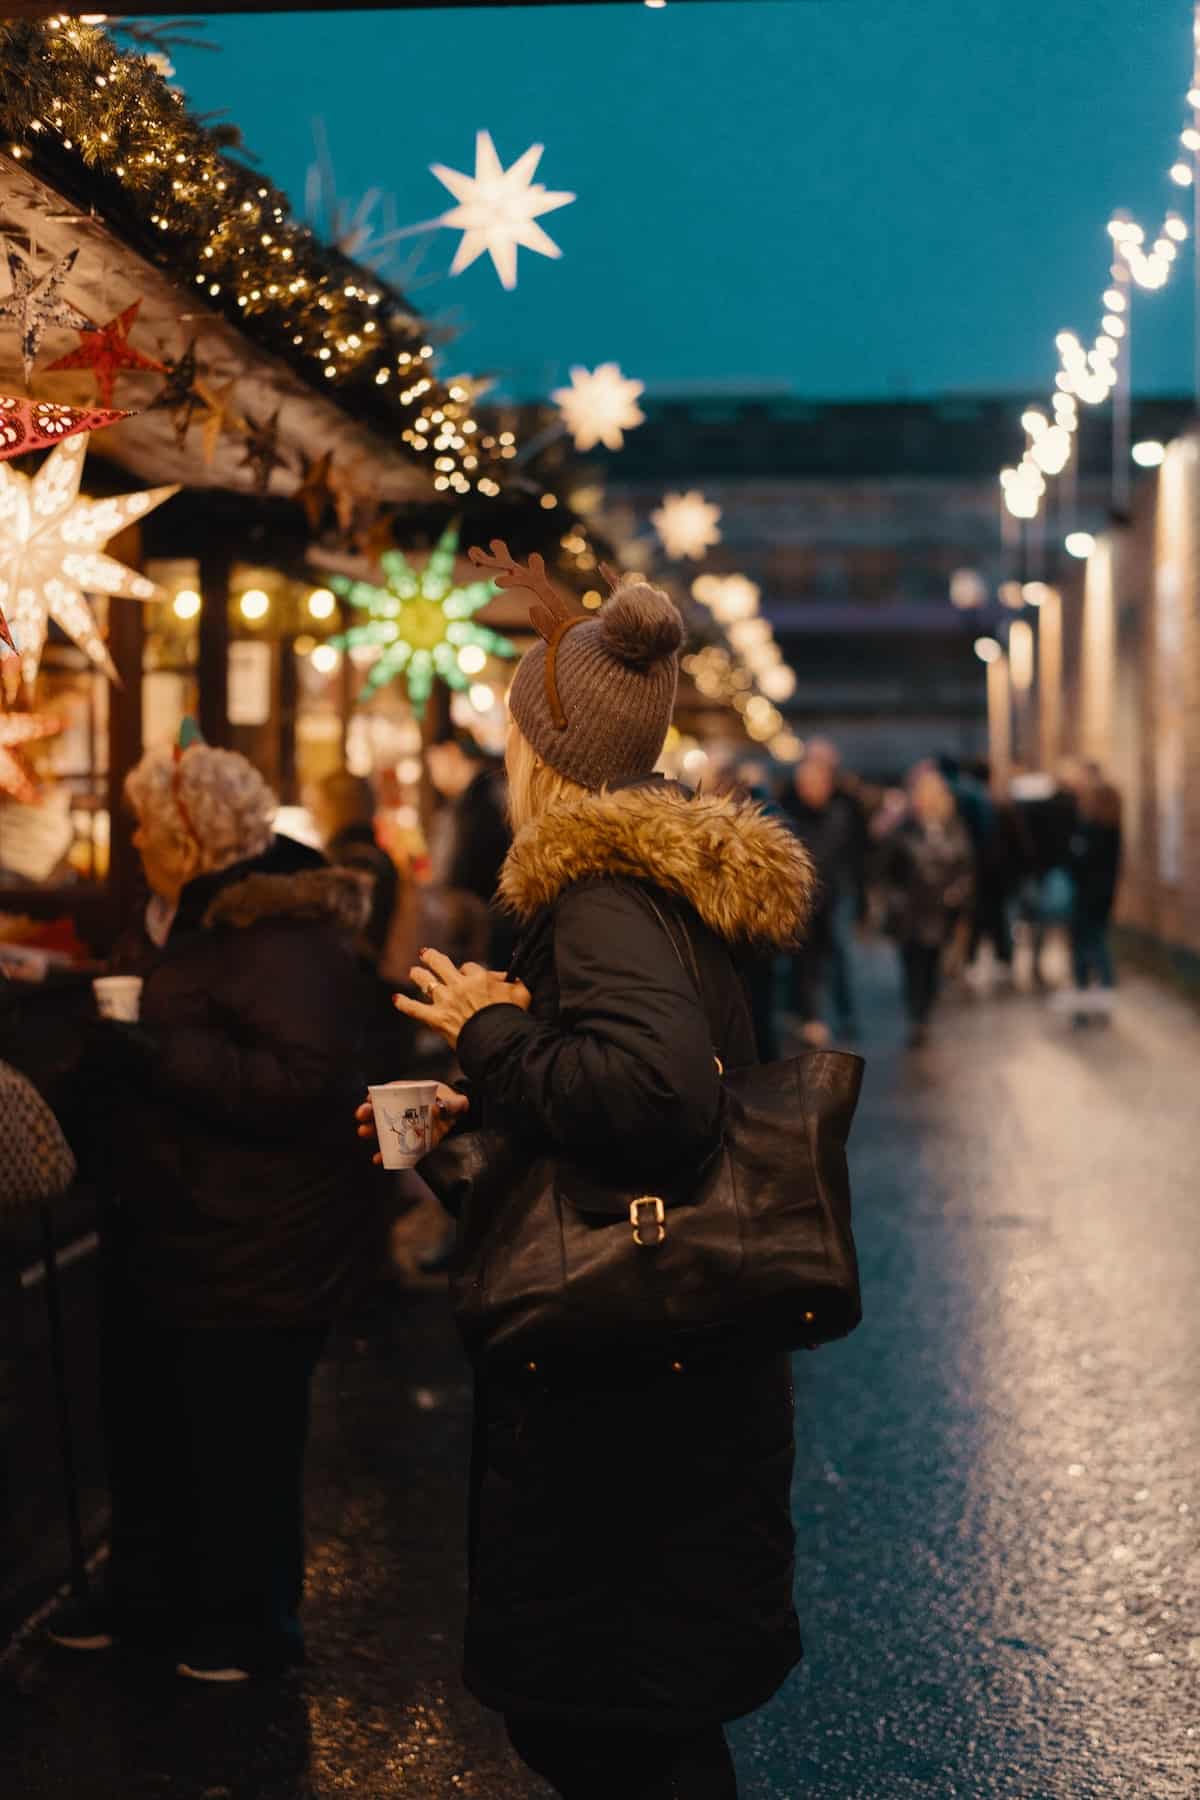 A woman standing among stalls at a brightly lit Christmas market.